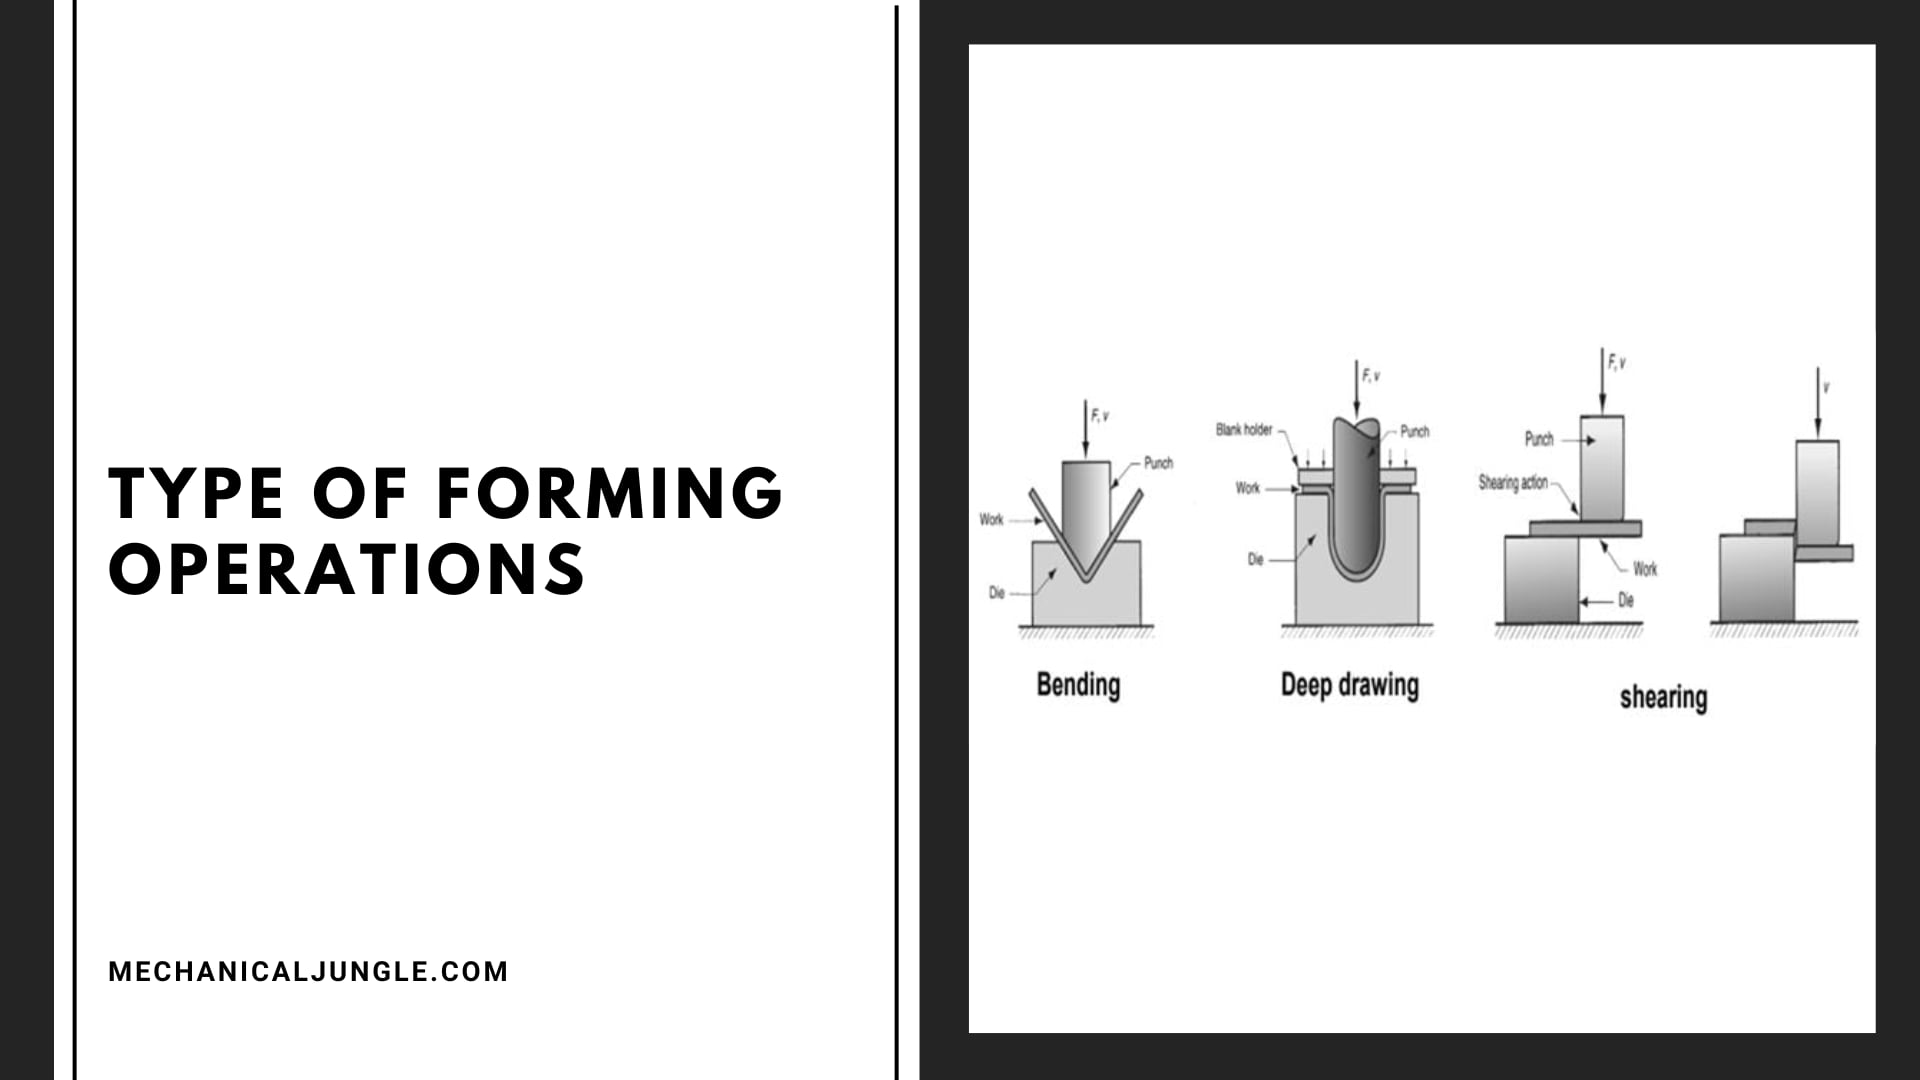 Type of Forming Operations